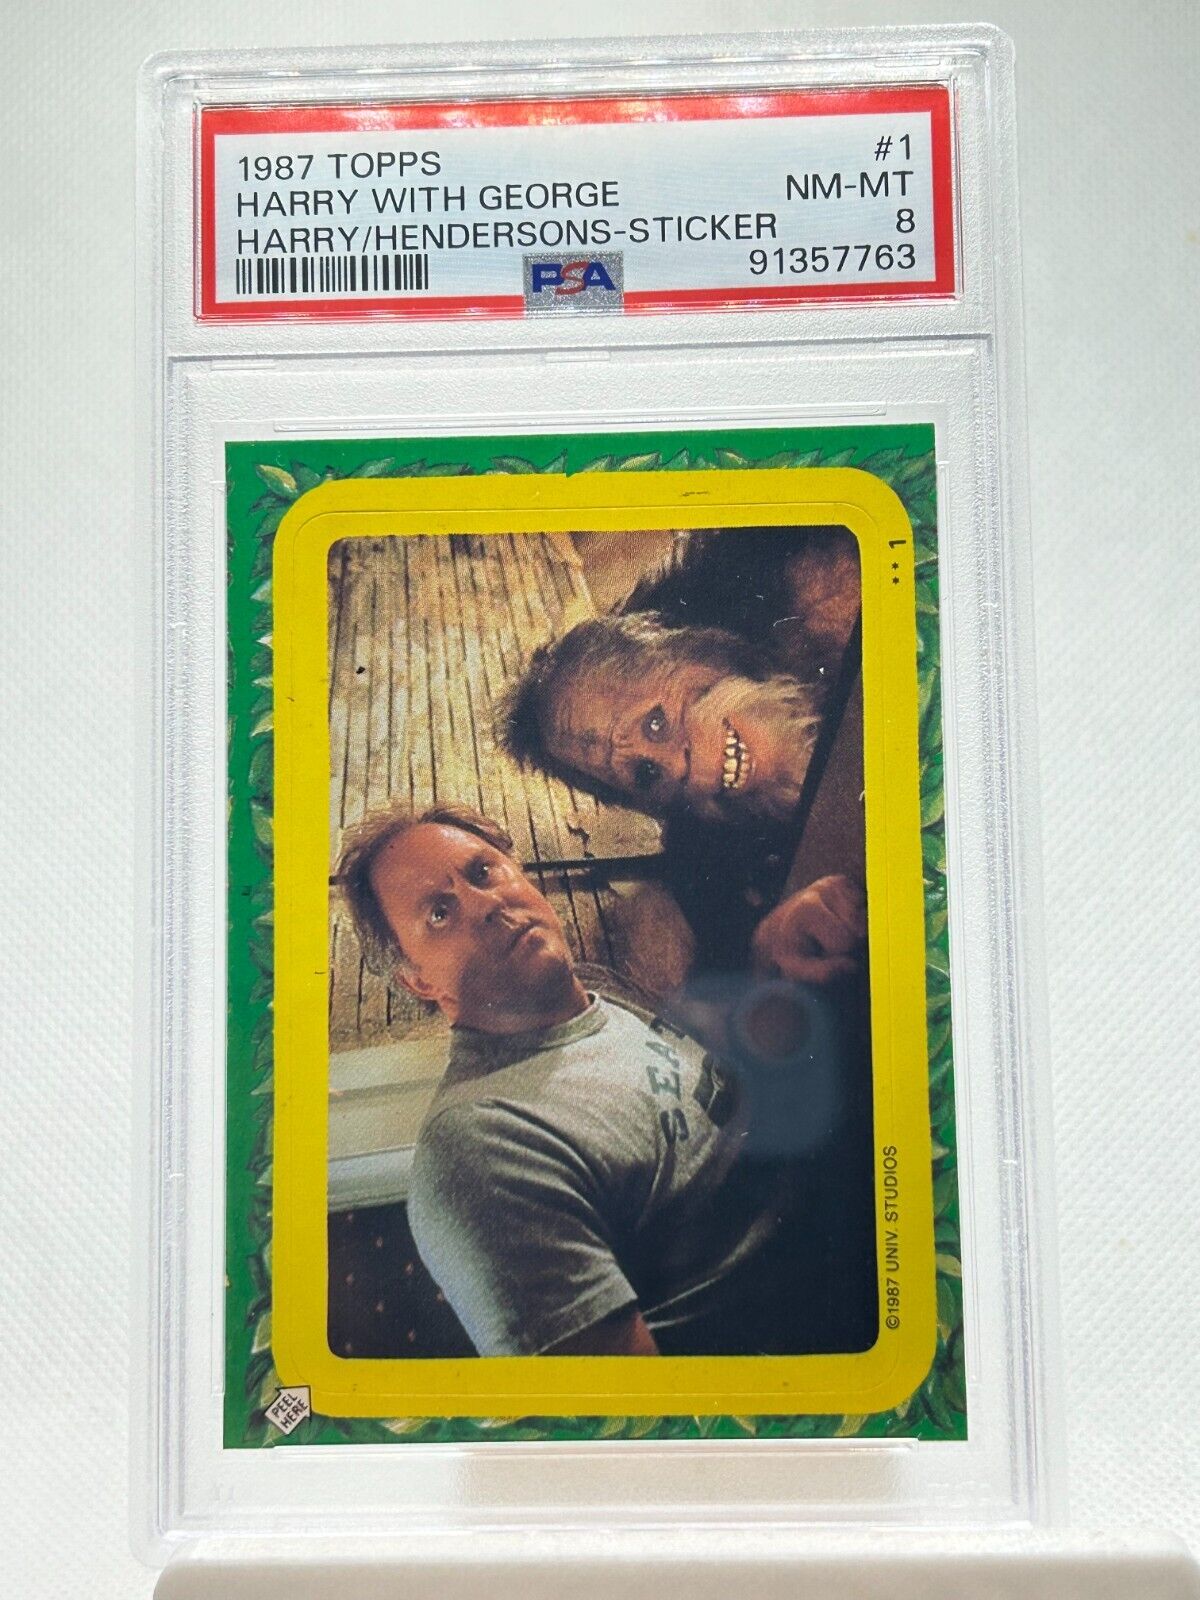 1987 Topps Harry & Hendersons Sticker with George - Pop 1 - PSA 8